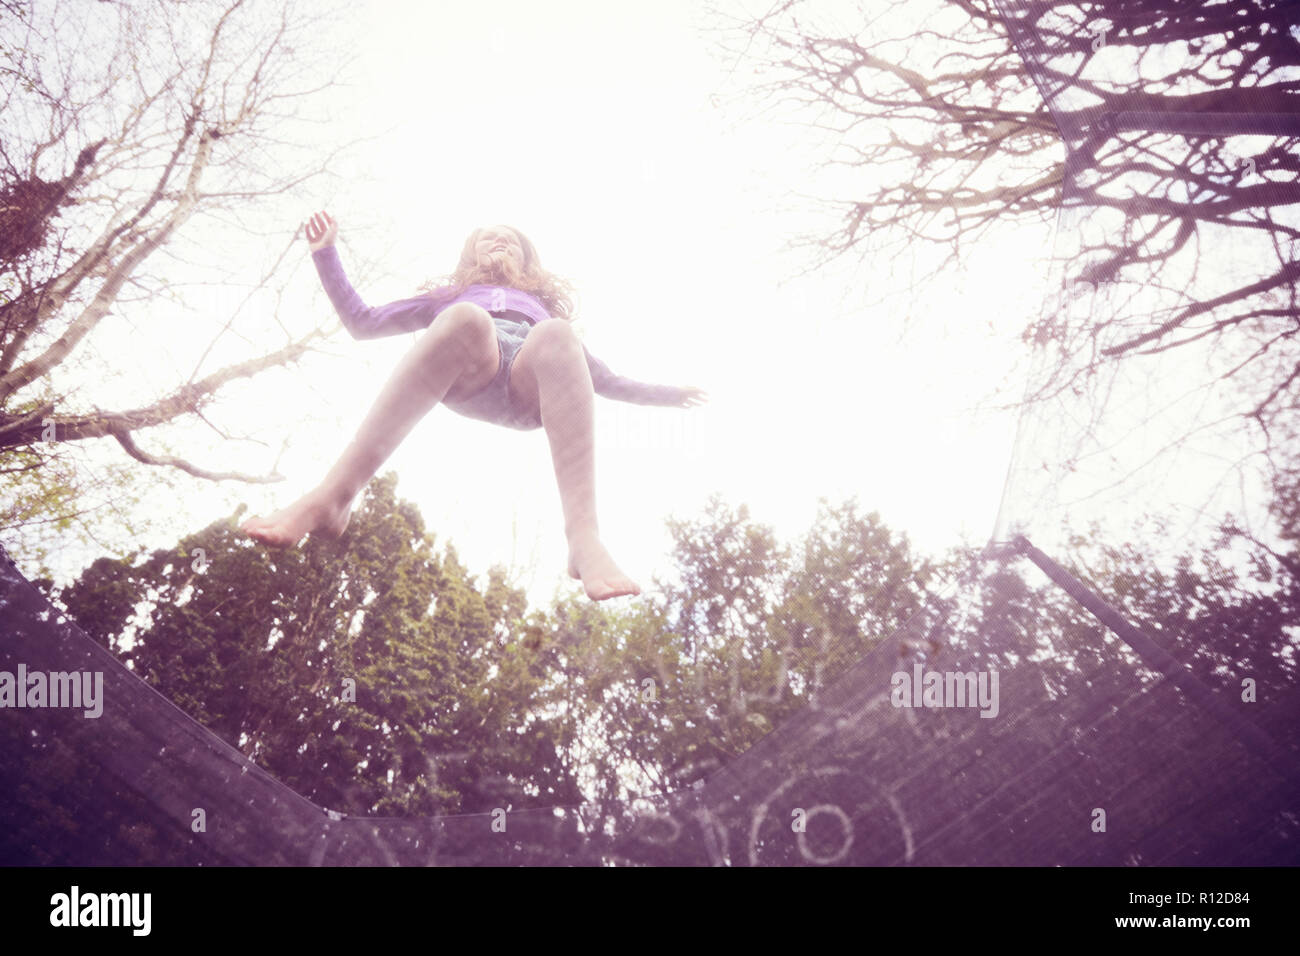 Girl jumping on trampoline, low angle view Stock Photo